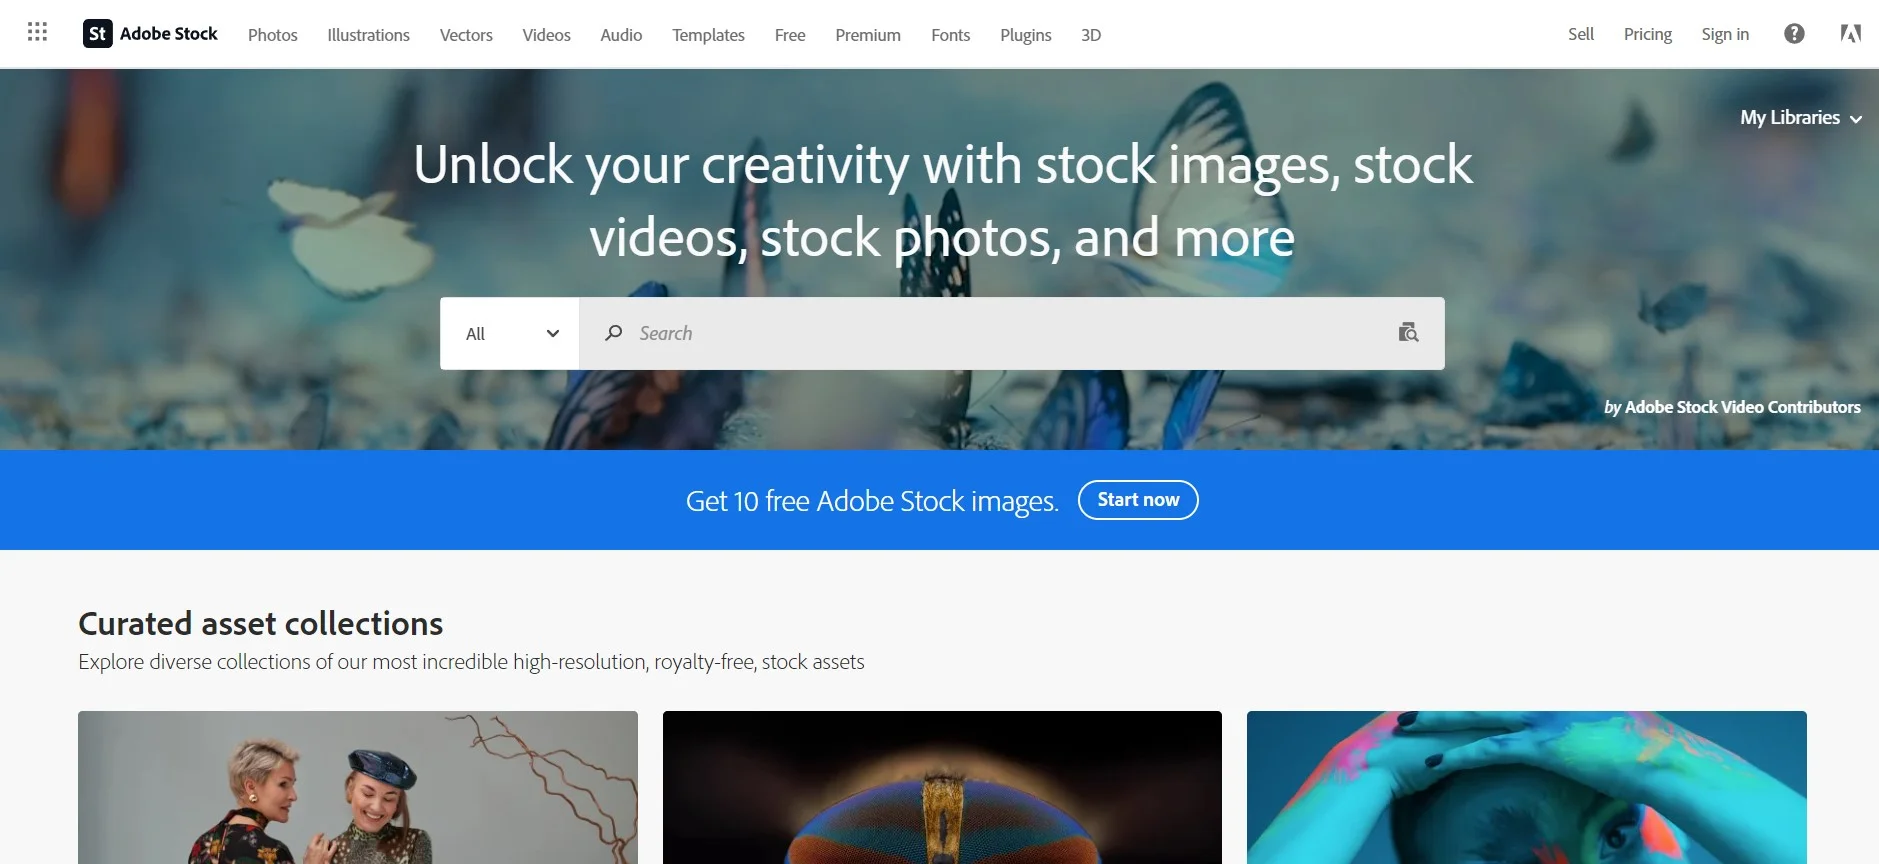 Adobe stock lets you unlock your creativity with stock images, stock videos, stock photos, and more